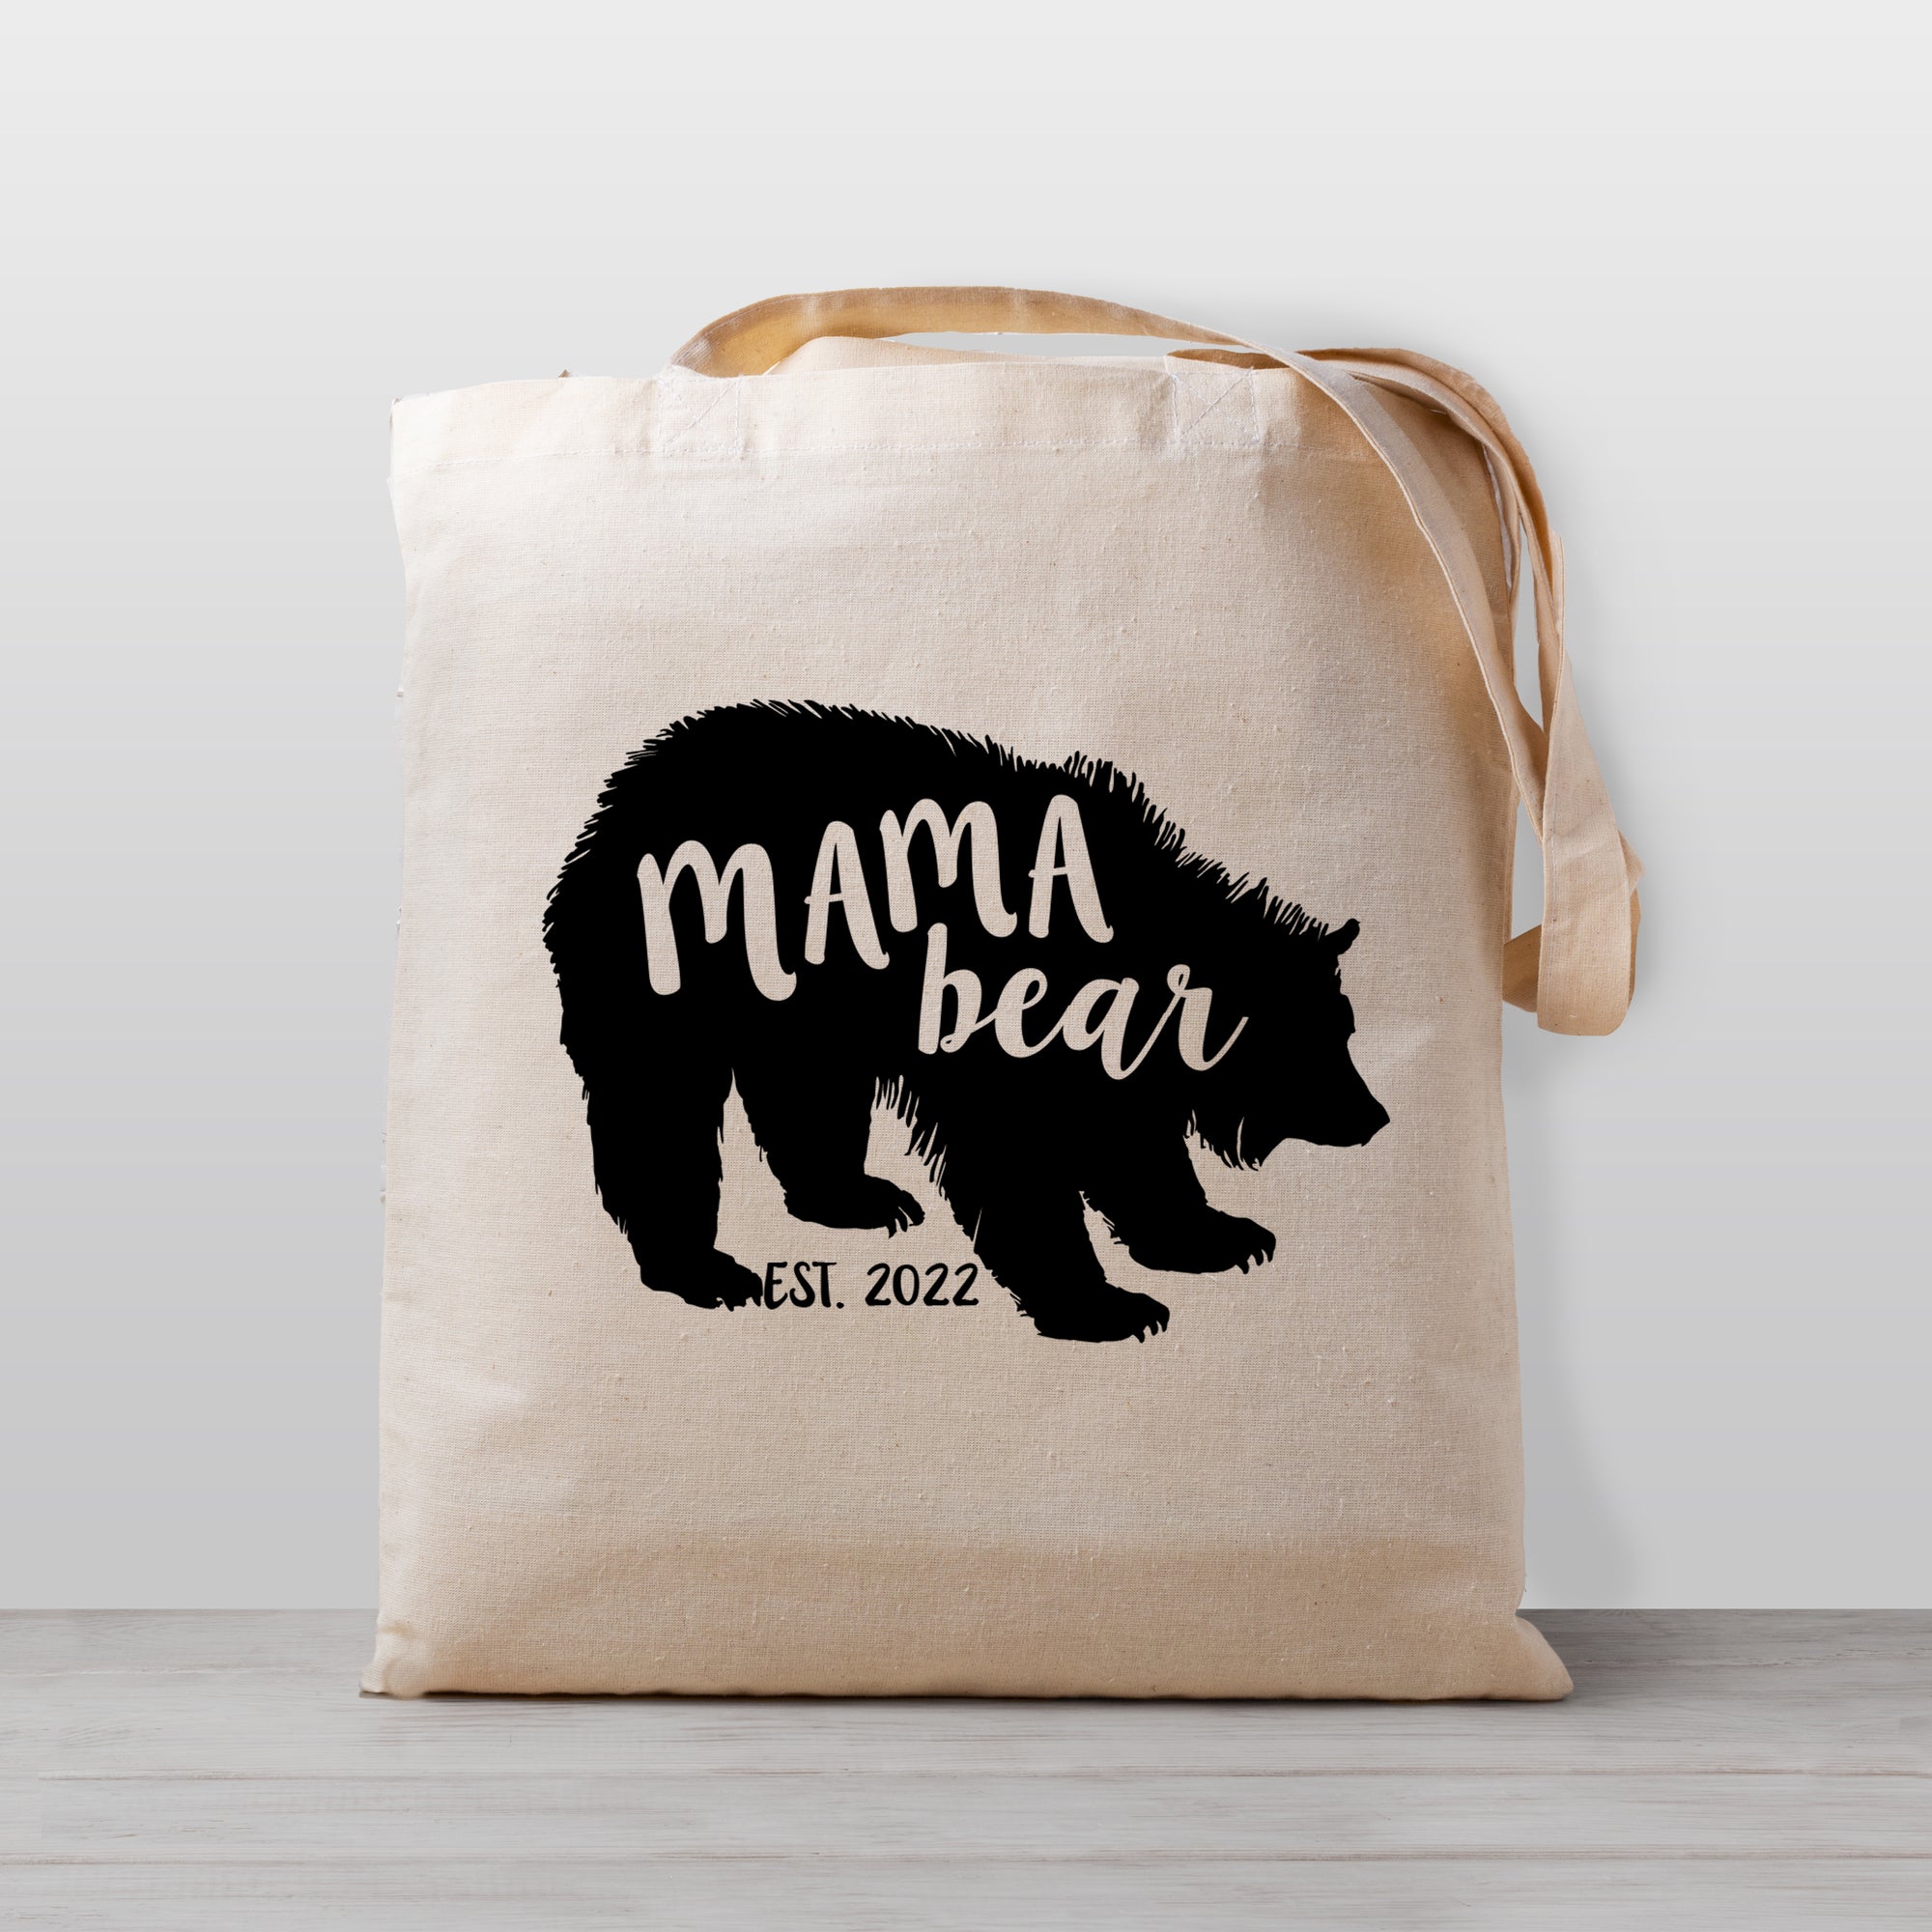 Mama Bear Tote bag with "established year" as a custom option, 100% natural cotton canvas